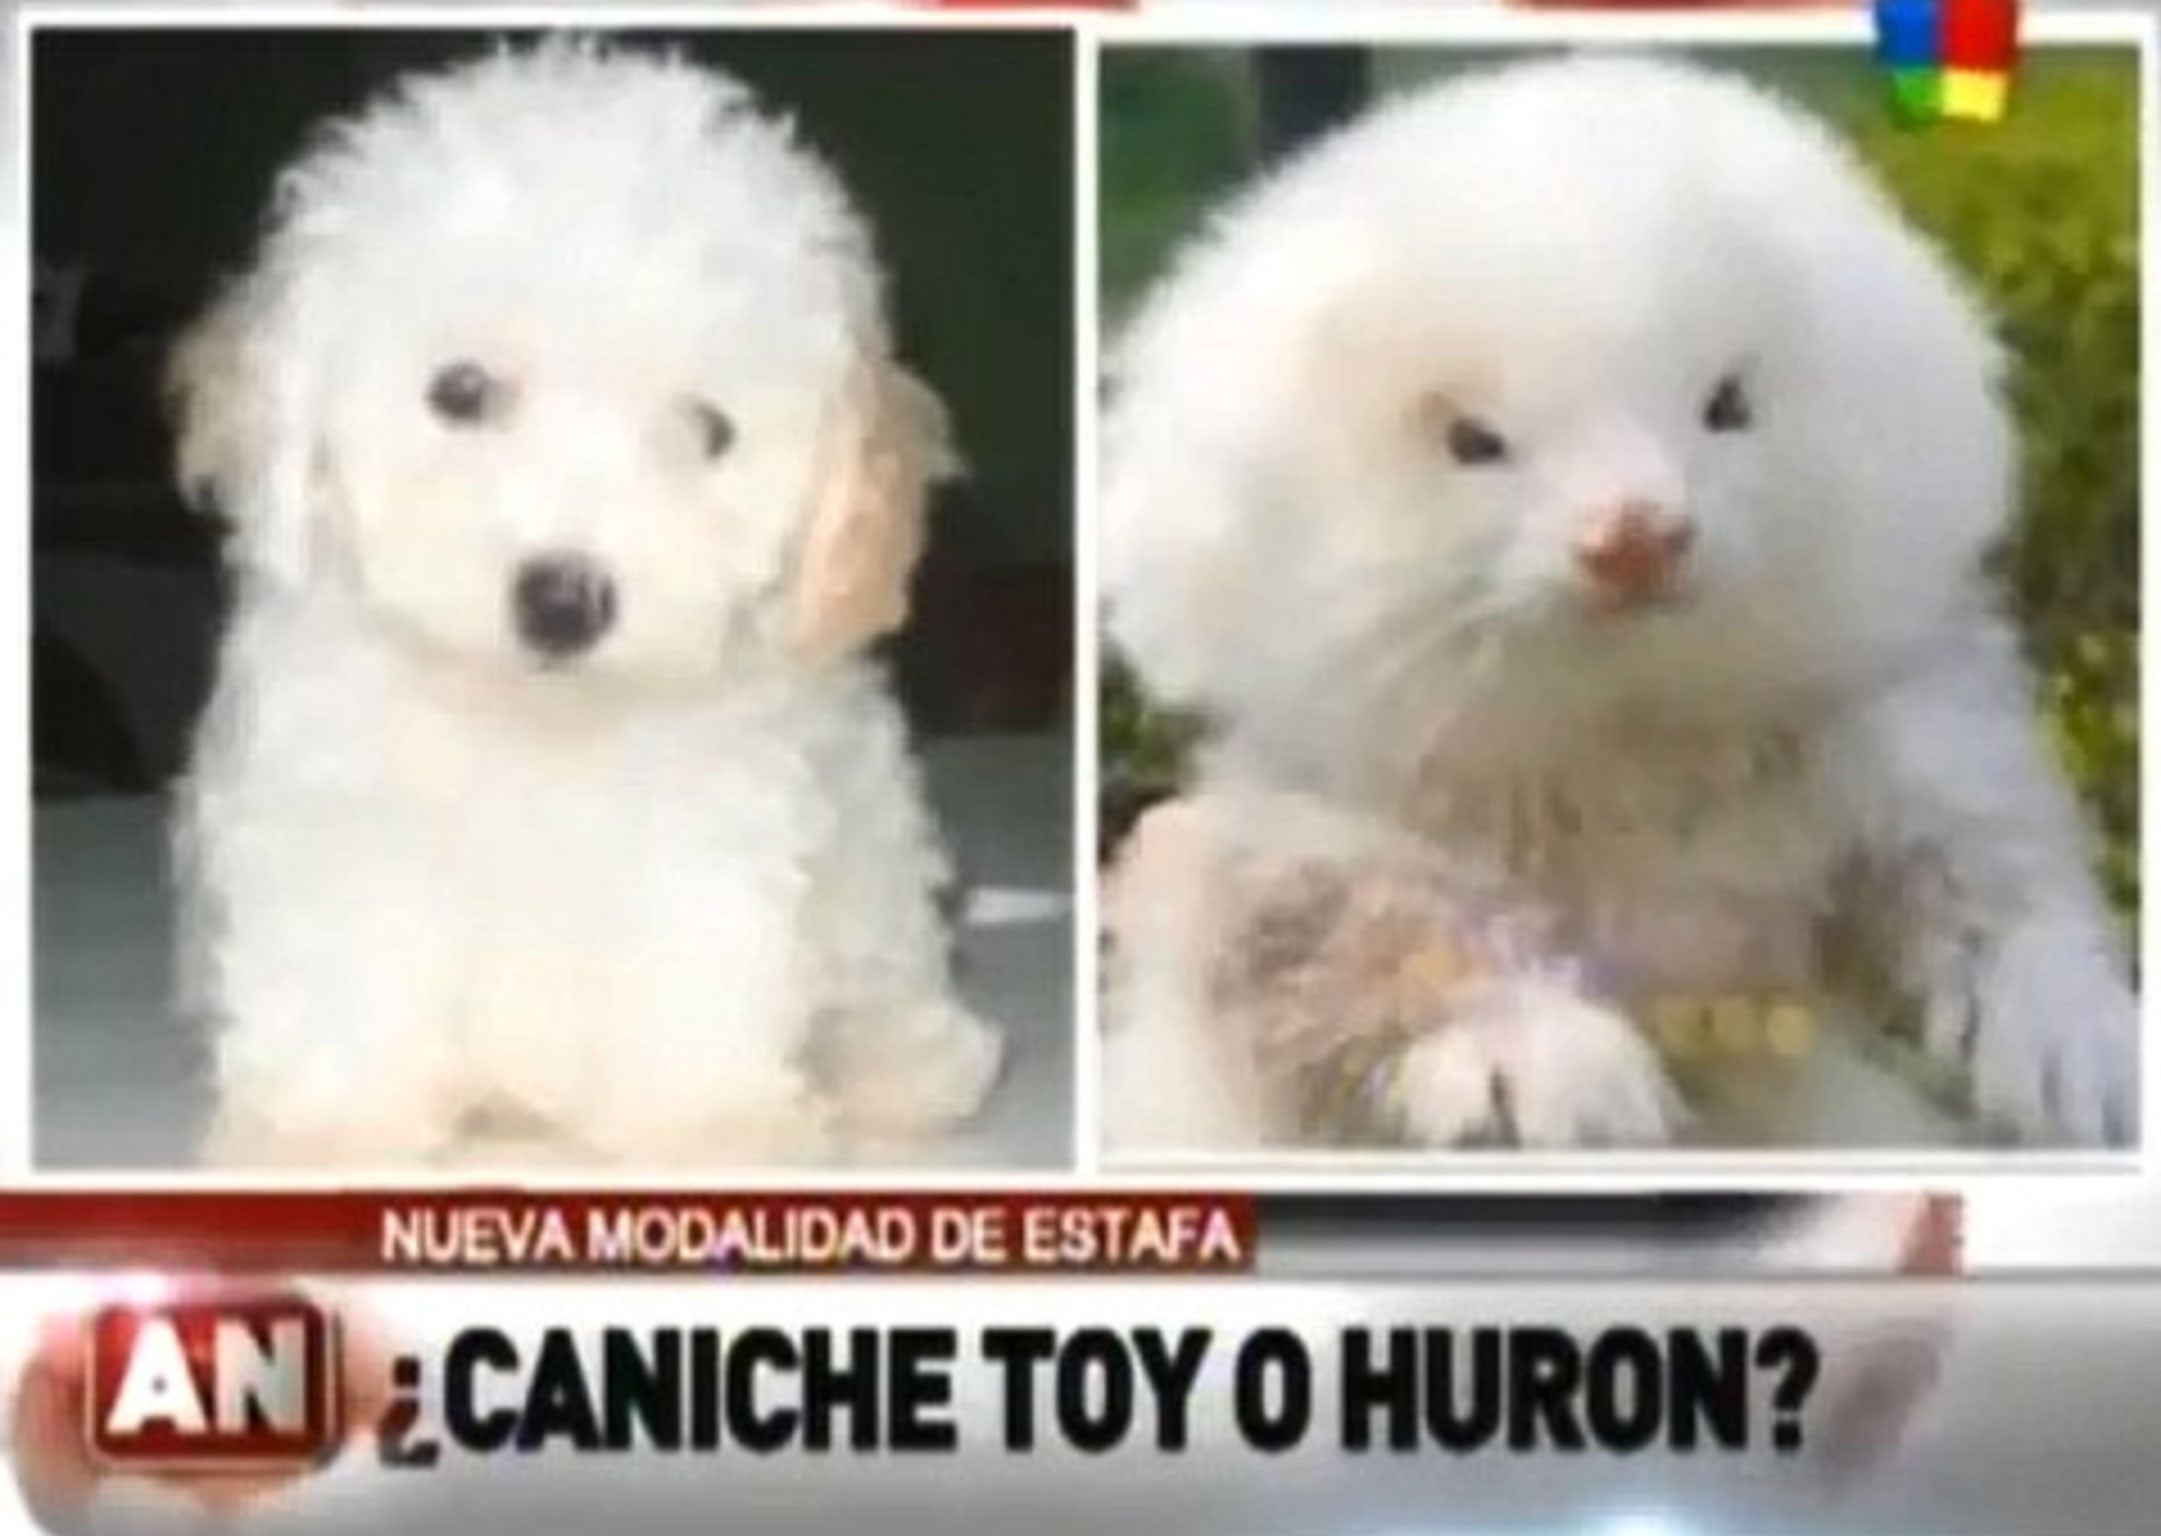 A gullible retired man in Argentina has fallen victim to a scam after discovering the toy poodle pups he bought at a local market were actually fluffed-up ferrets on steroids.